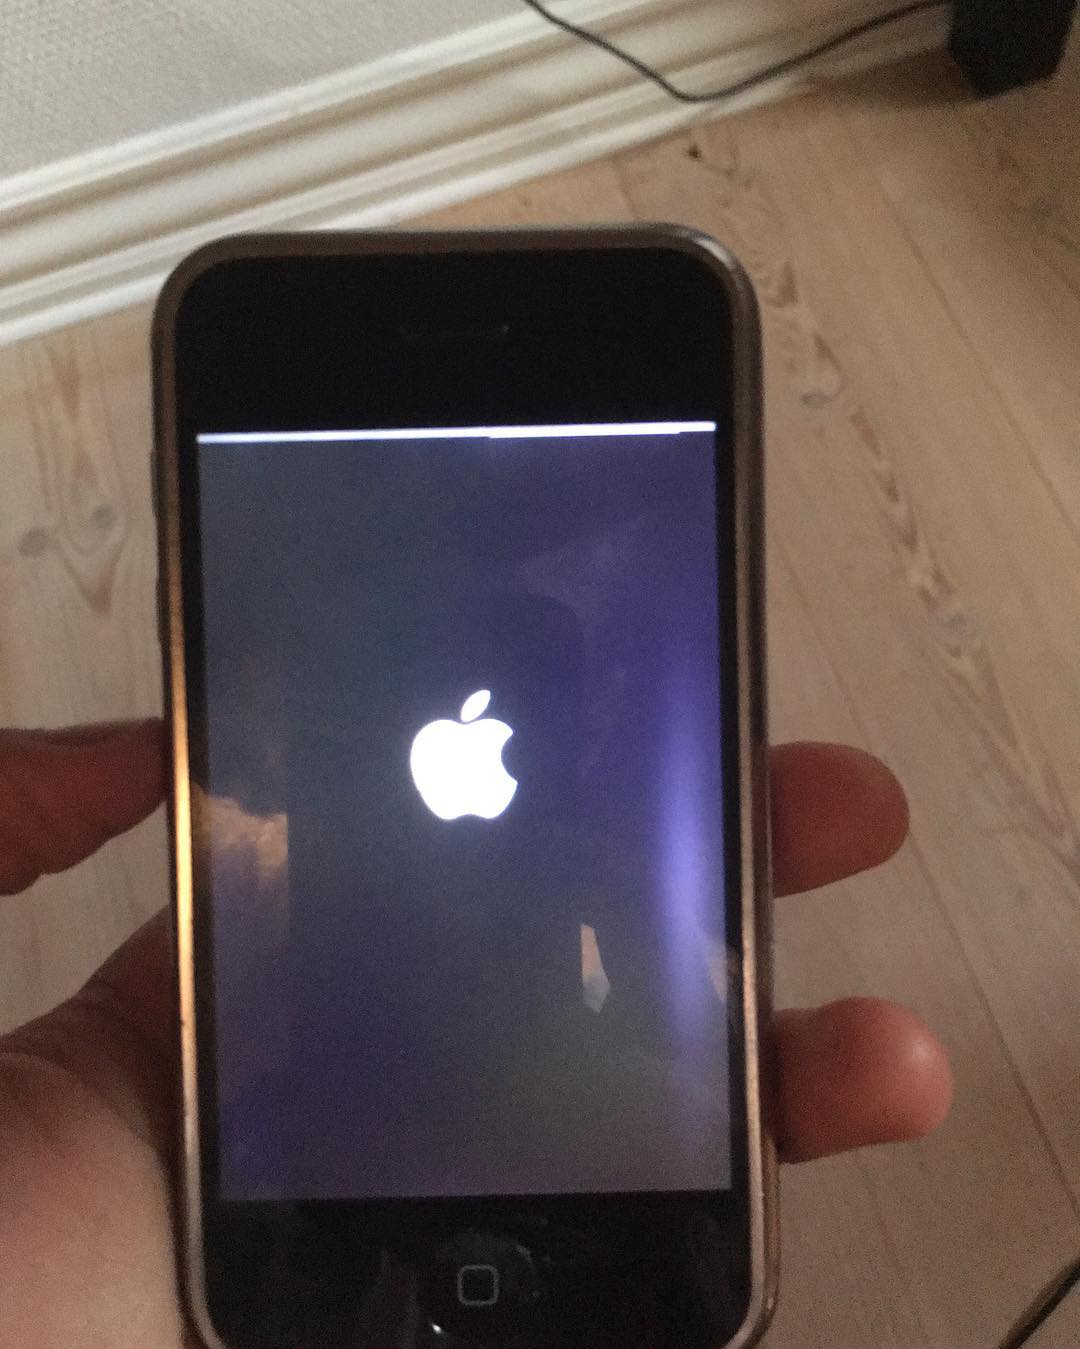 iPhone 2G shows apple logo for 7 seconds,….